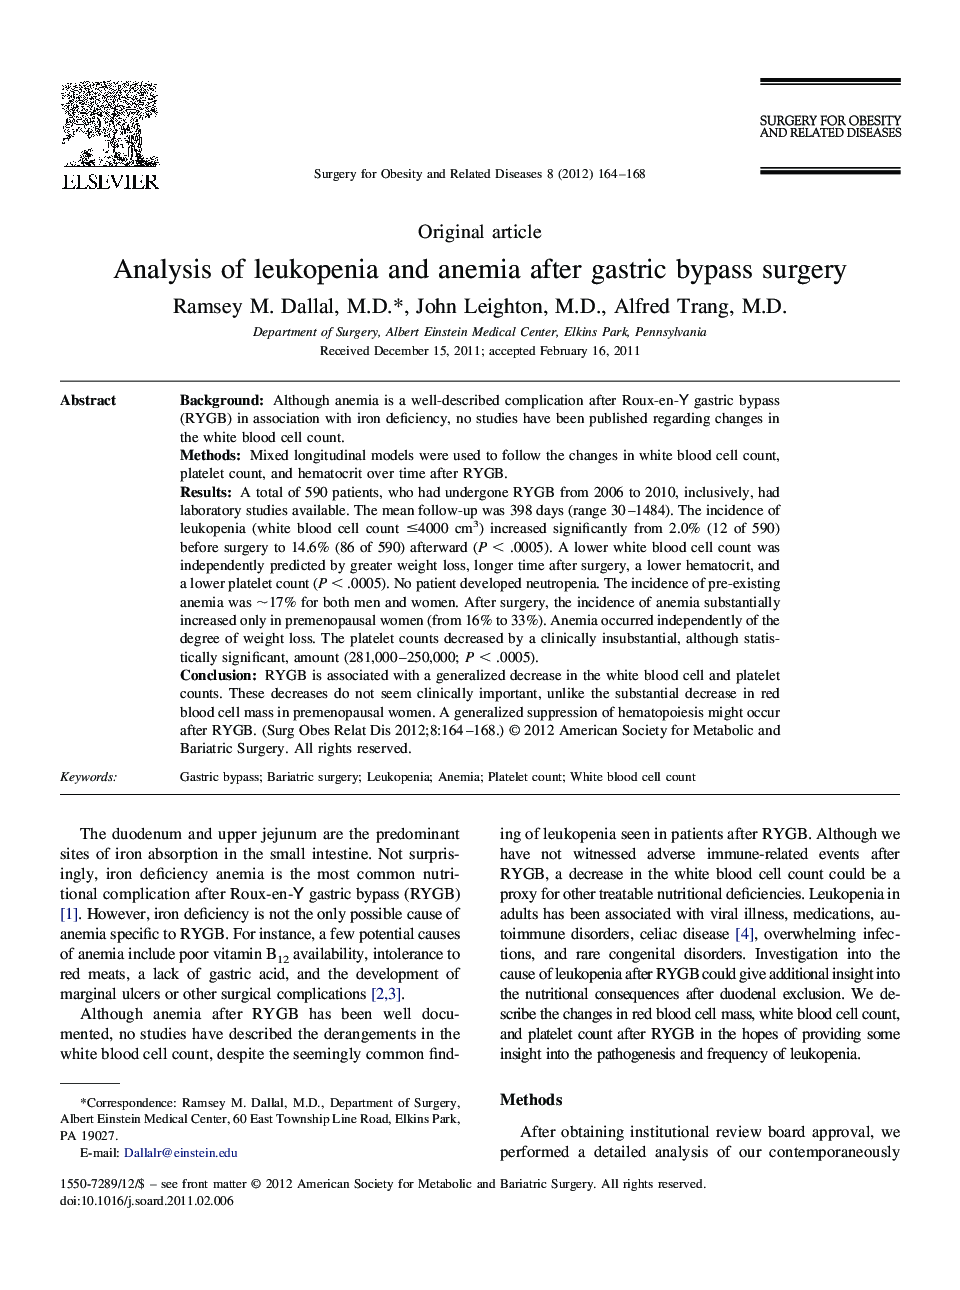 Analysis of leukopenia and anemia after gastric bypass surgery